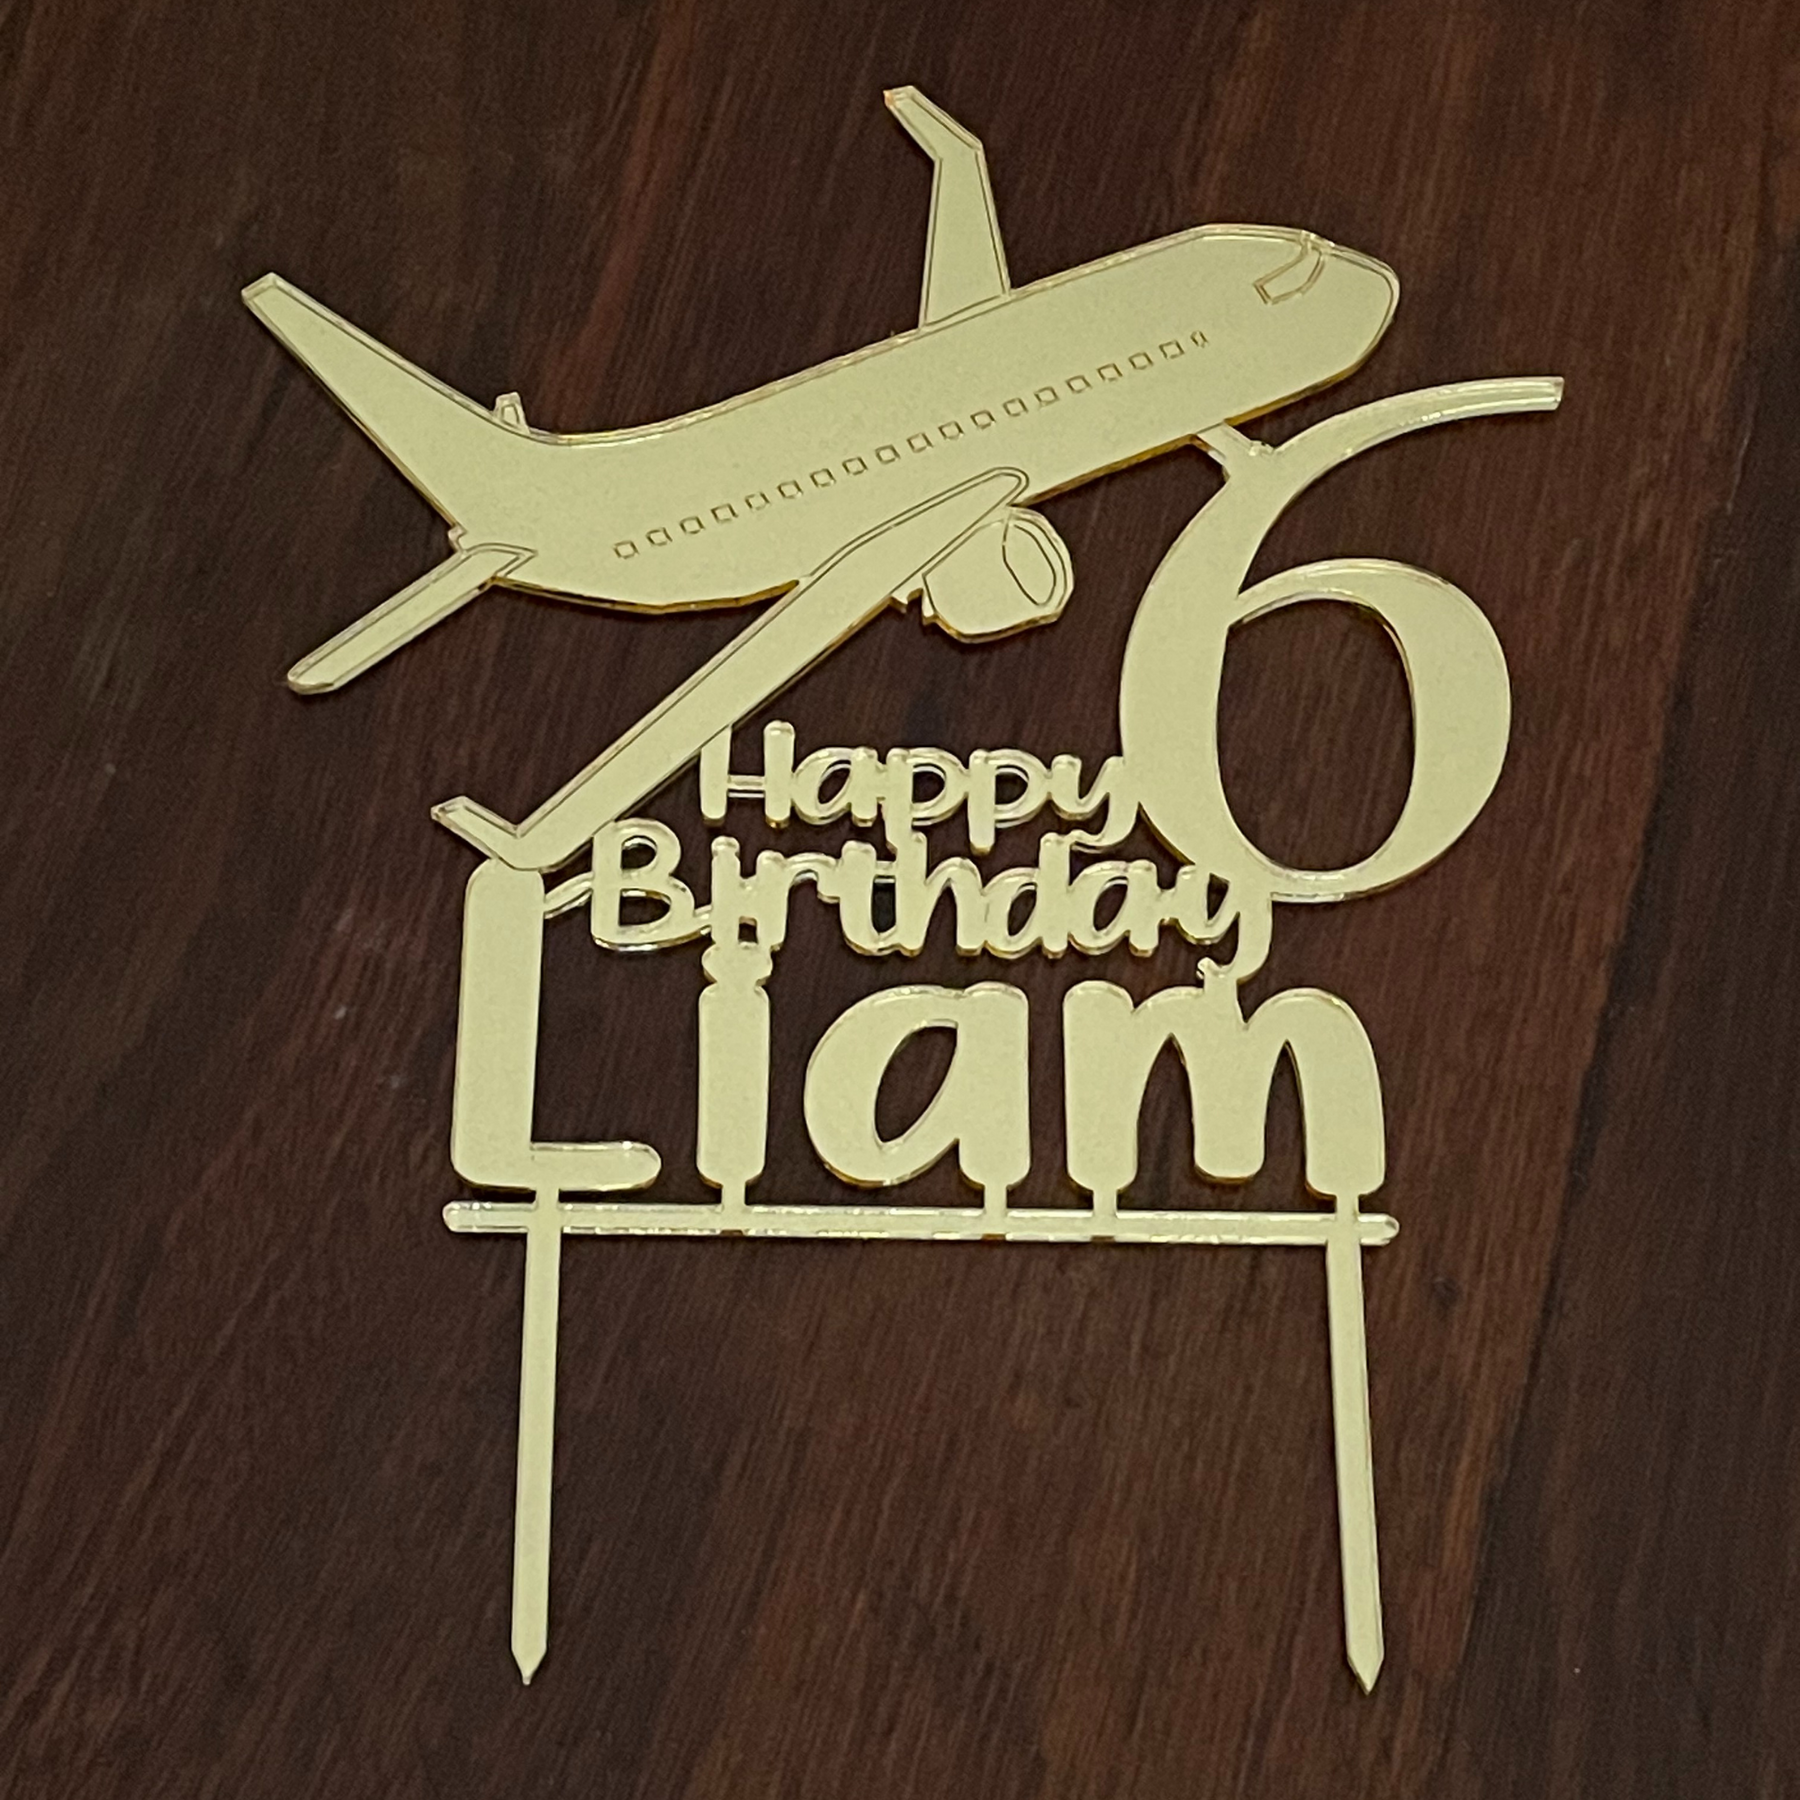 IGUOHAO , Airplane Happy Birthday Cake Topper,Airplane Aircraft Plain  Travel Themed Party Decorations for Kids Birthday Party Baby Shower |  Walmart Canada